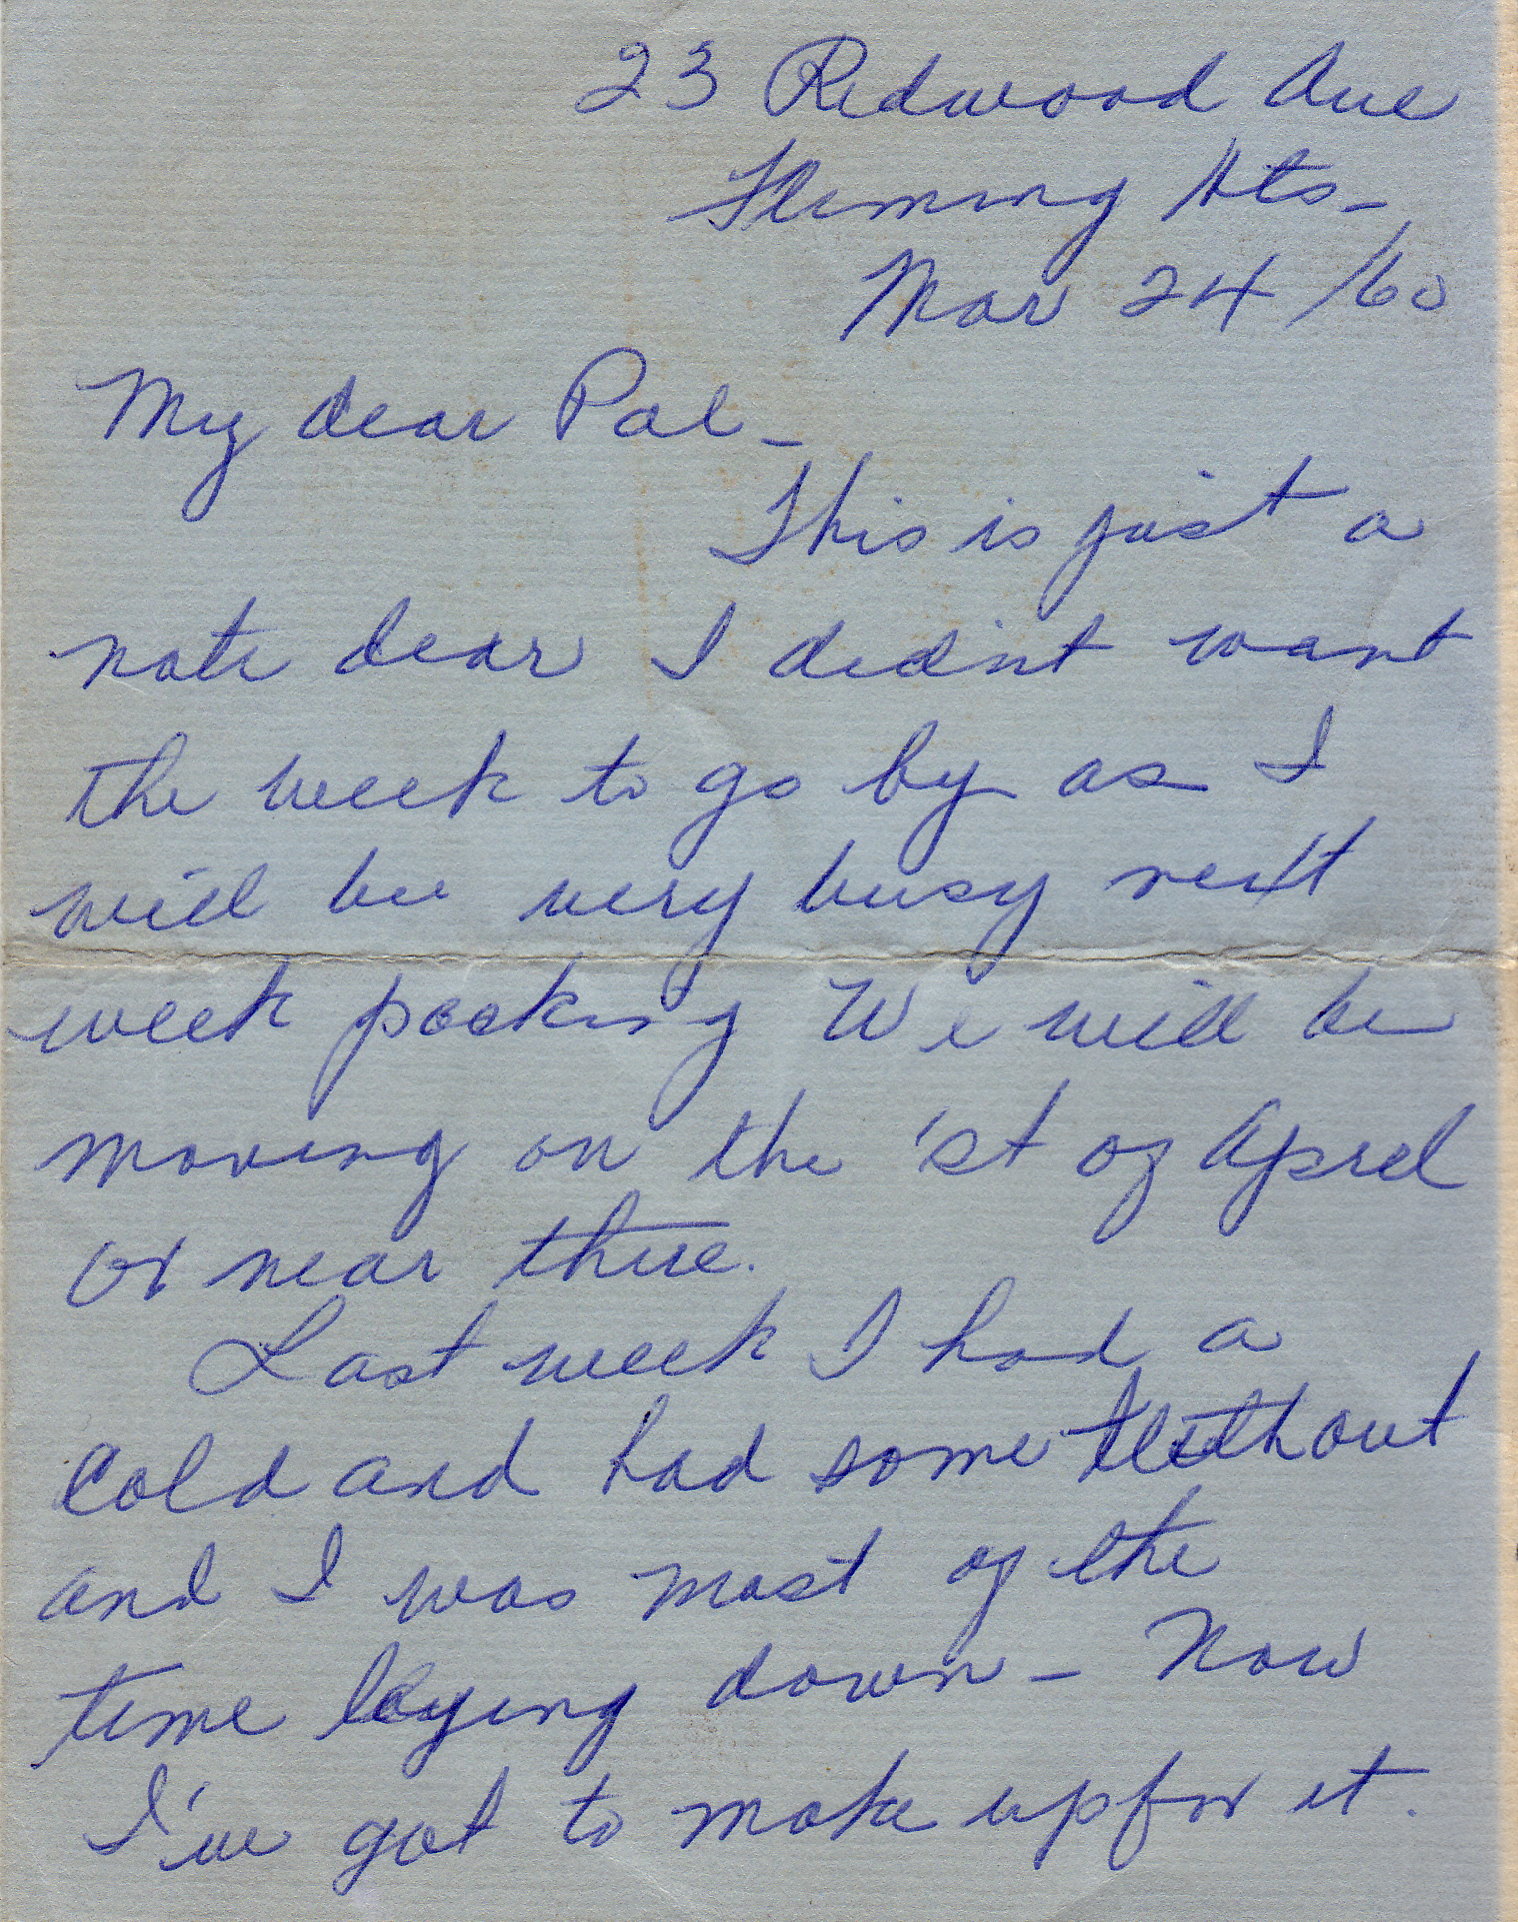 Letter to Pal, 1st page